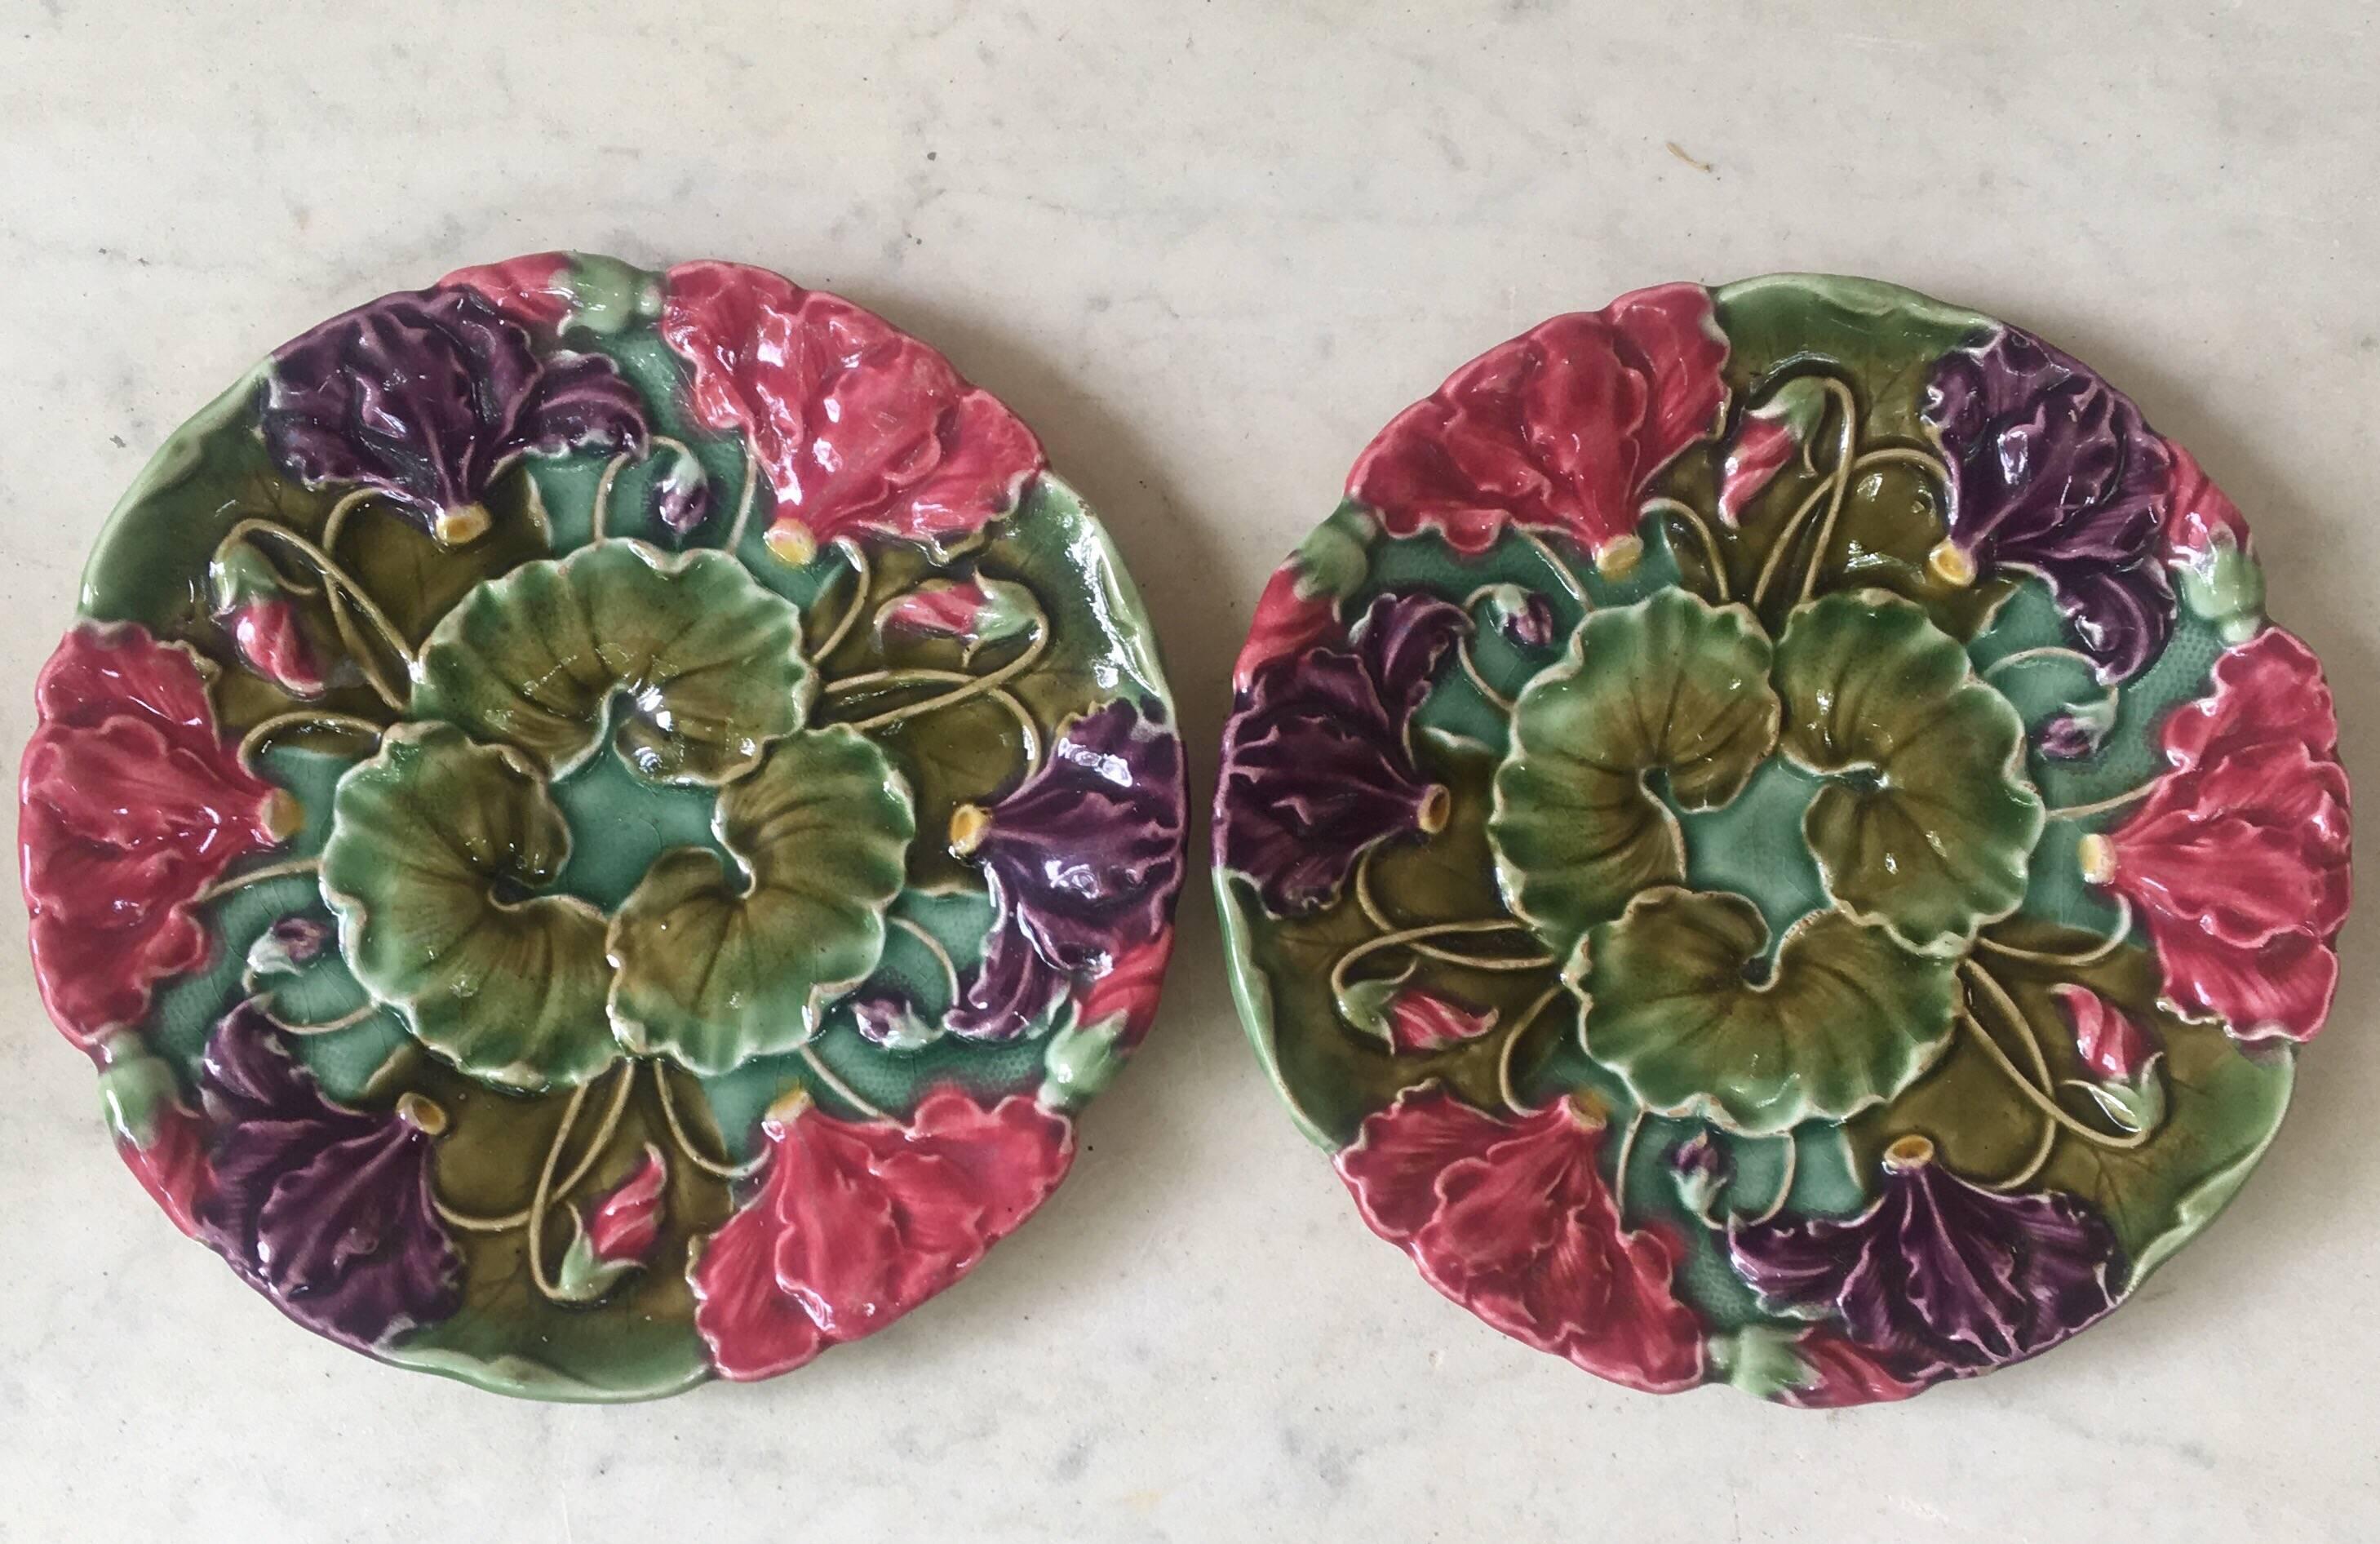 Lovely Majolica pink and purple flowers plate signed Schultz Cilli, circa 1900, Art Nouveau style and period.
